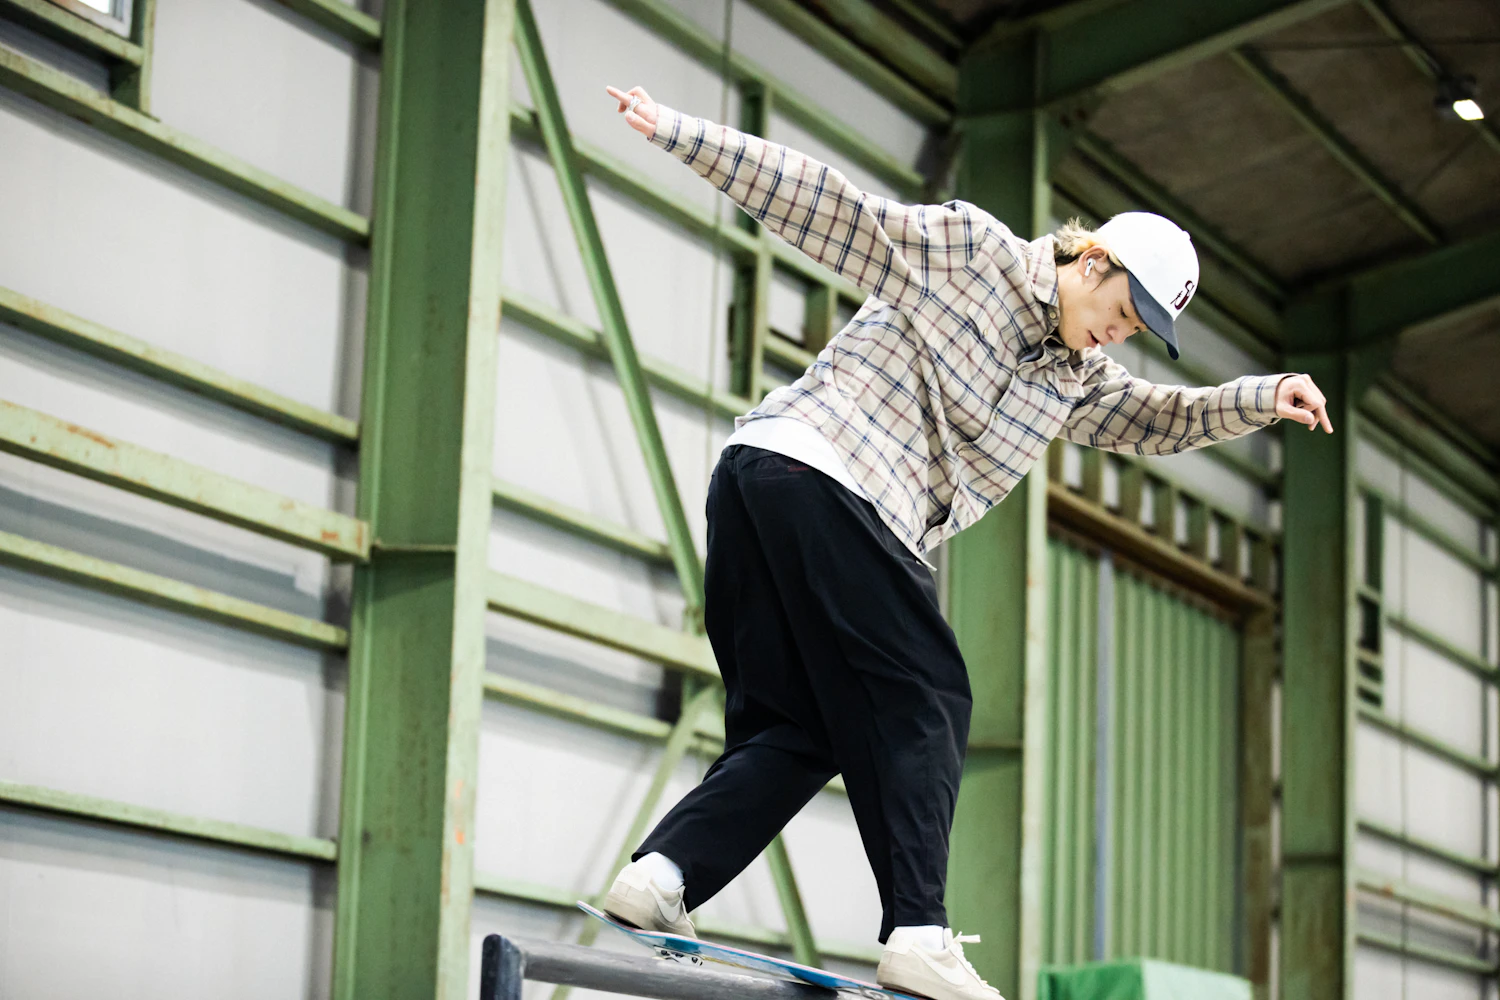 Shirai describes his skateboarding style as challenging himself with tricks and moves that nobody else has done